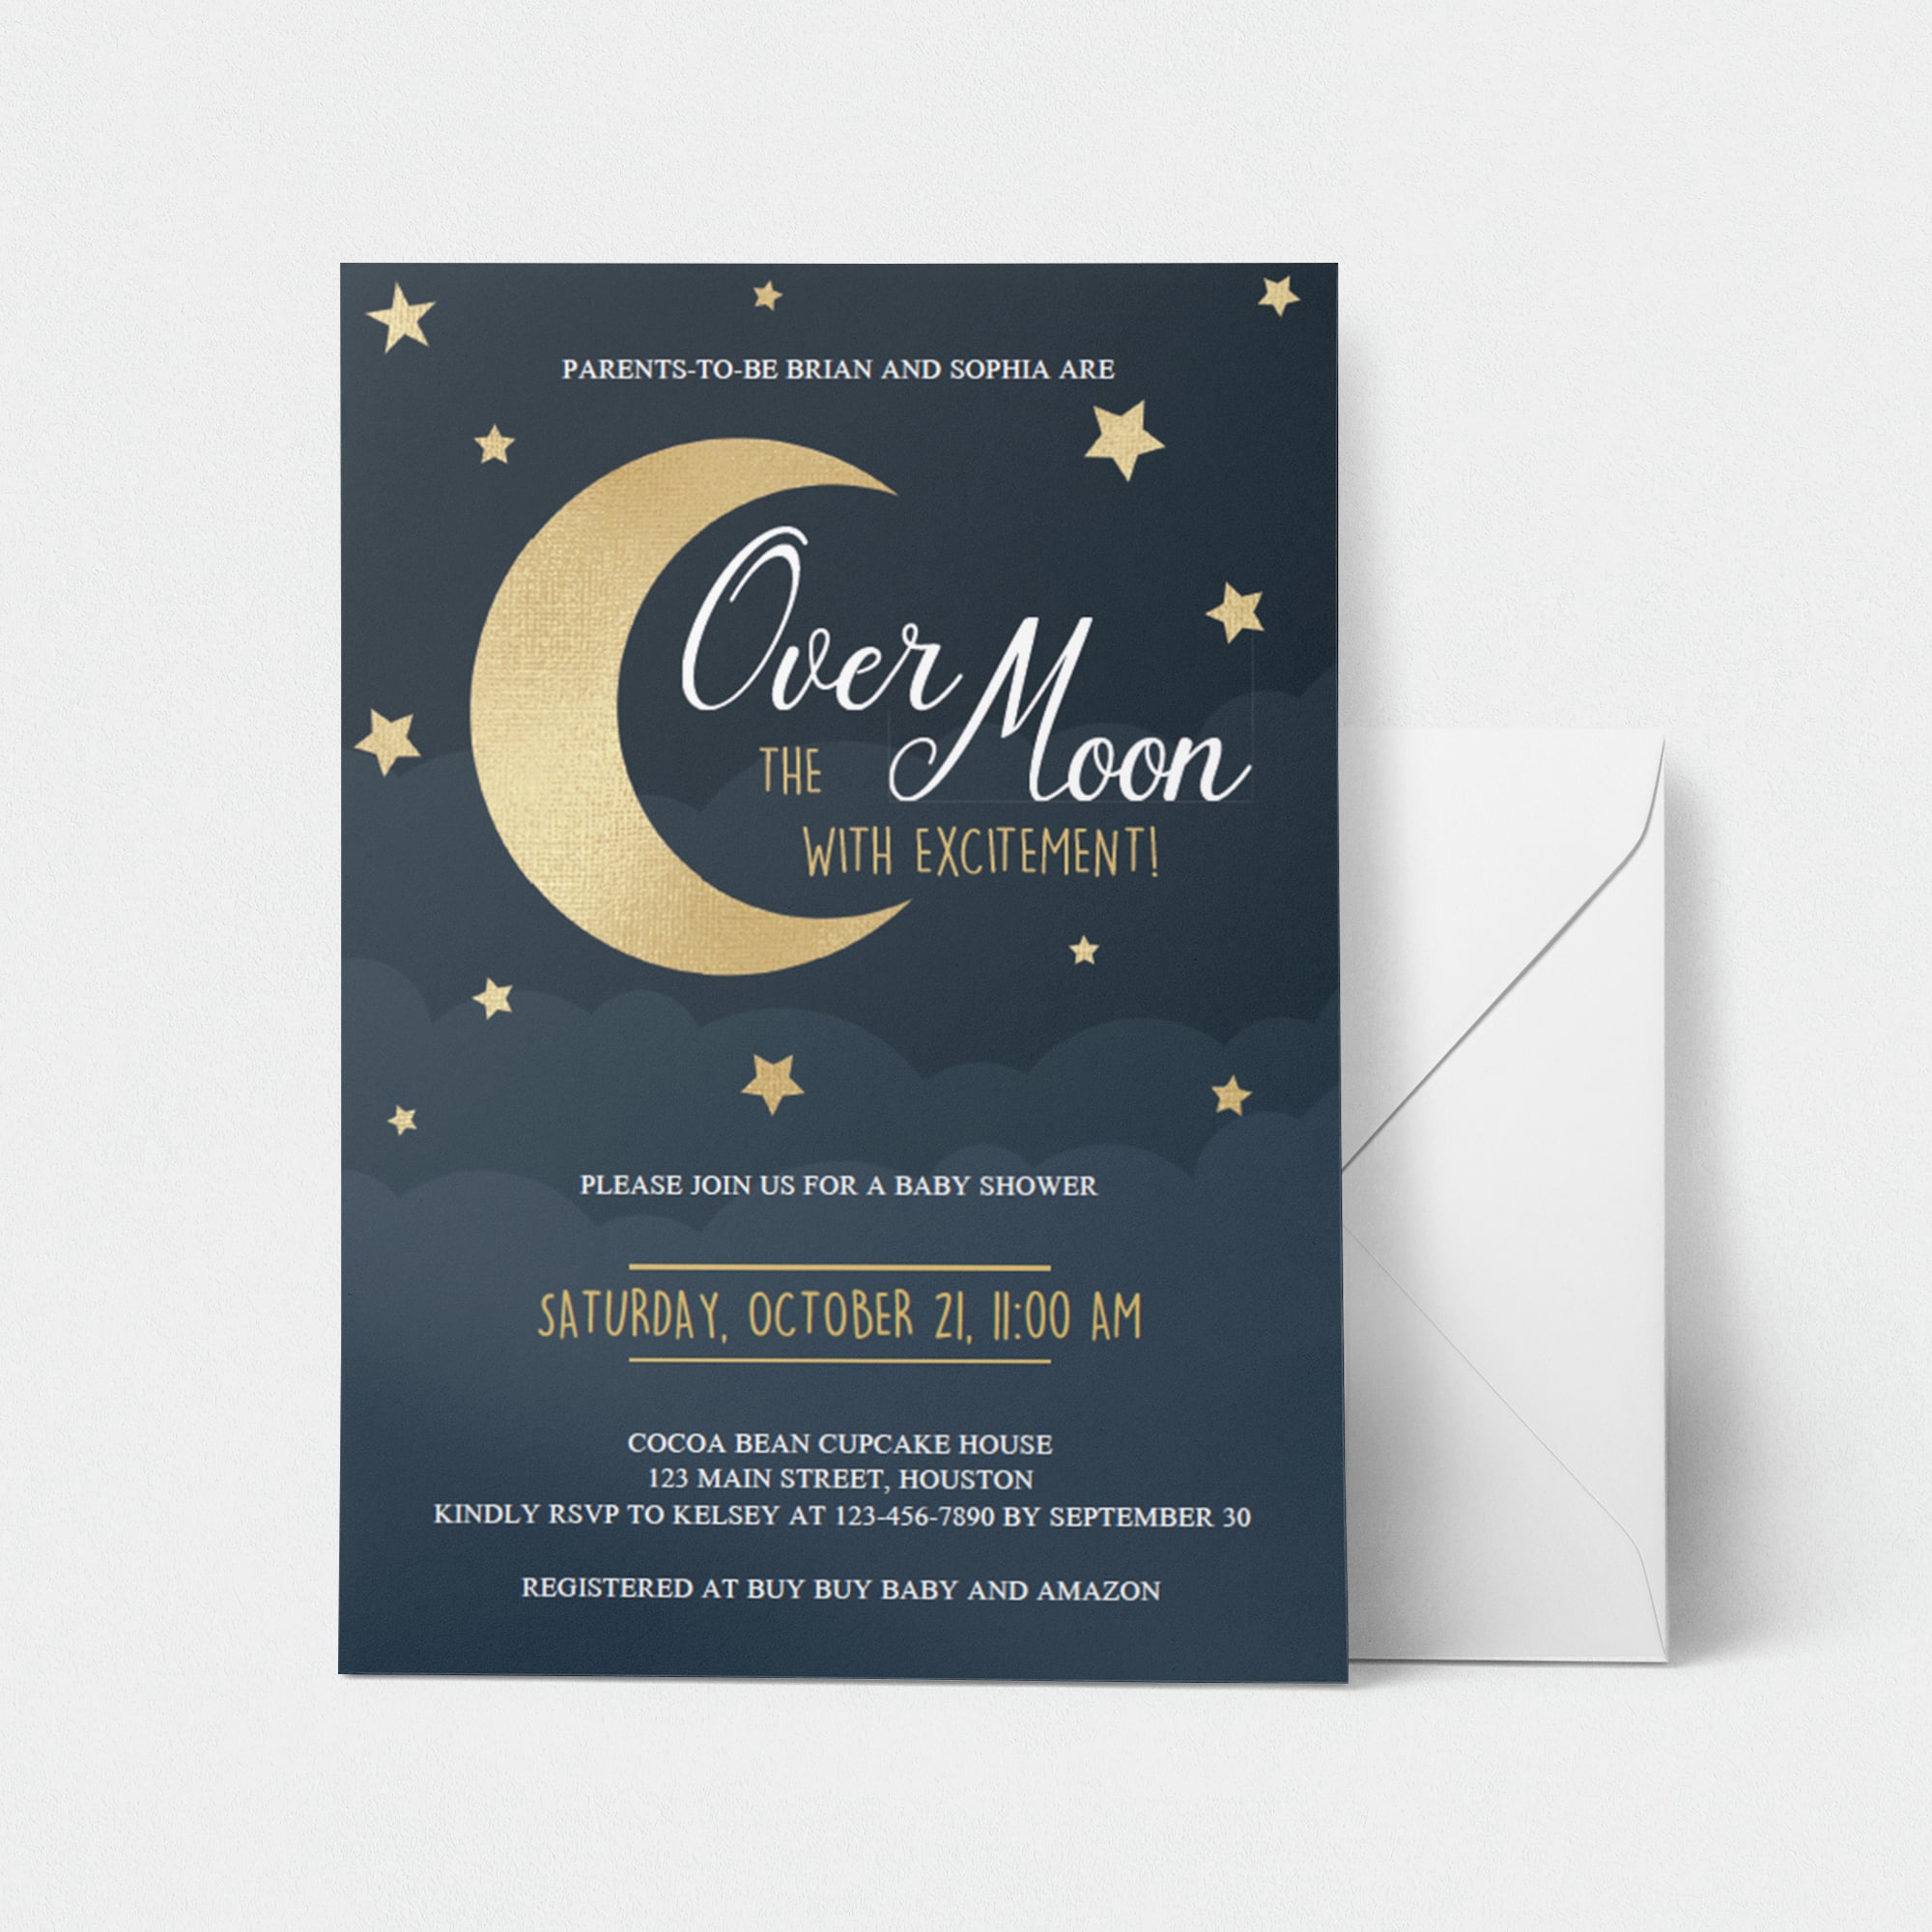 Over the moon baby shower invitation template by LittleSizzle